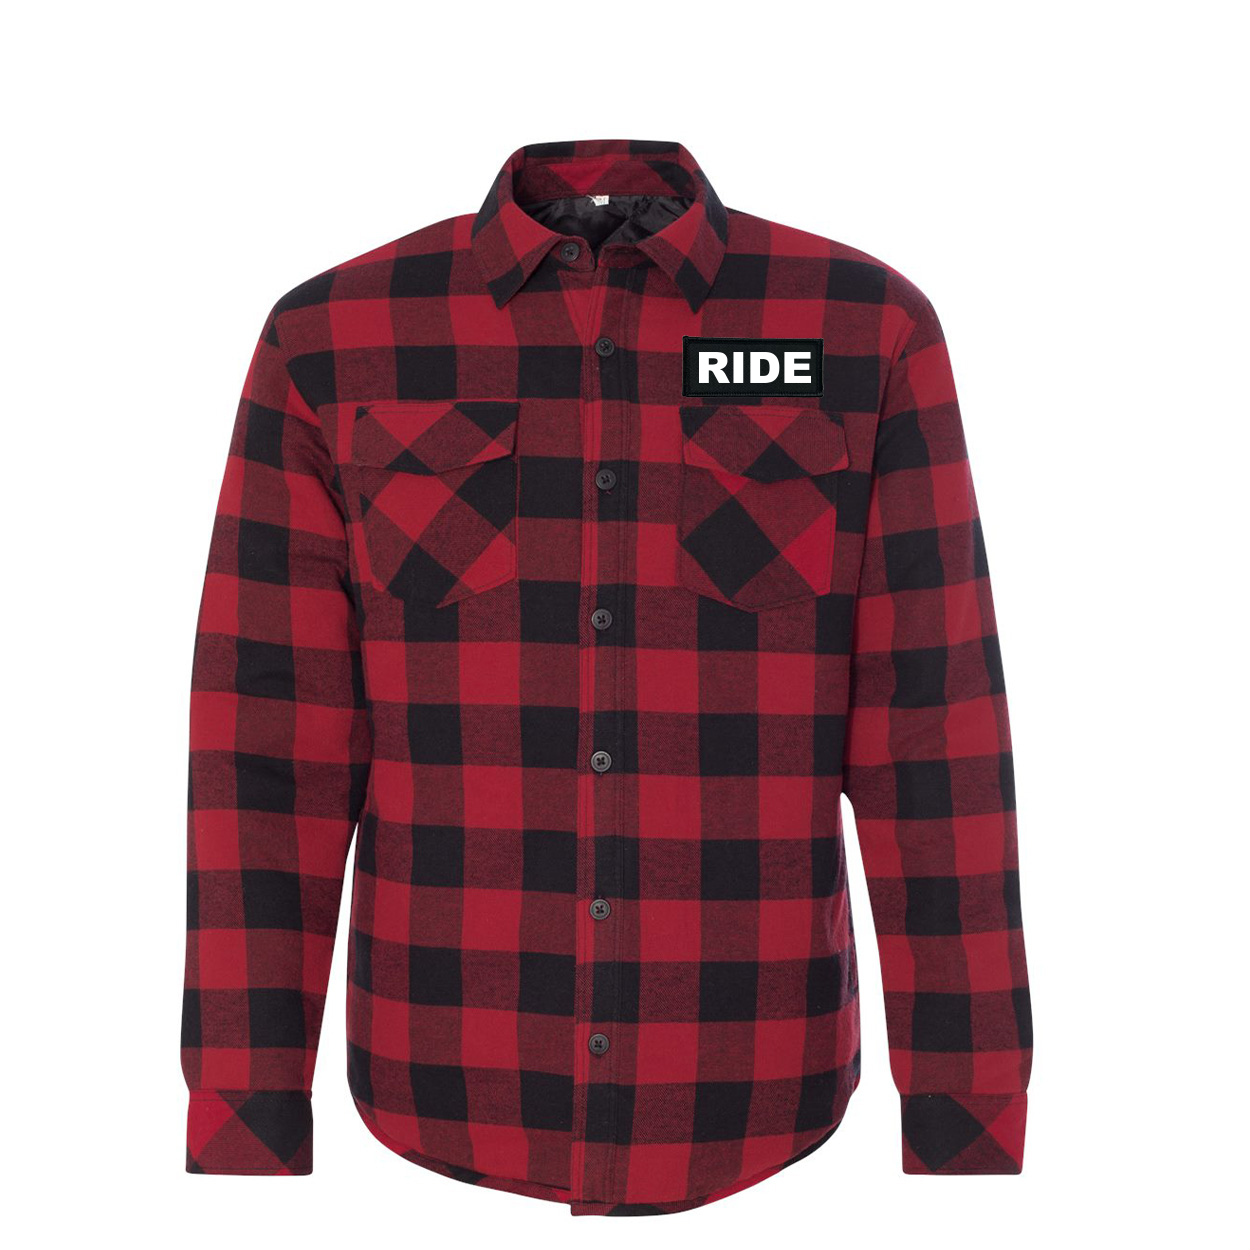 Ride Brand Logo Classic Unisex Woven Patch Quilted Button Flannel Jacket Red/Black Buffalo (White Logo)